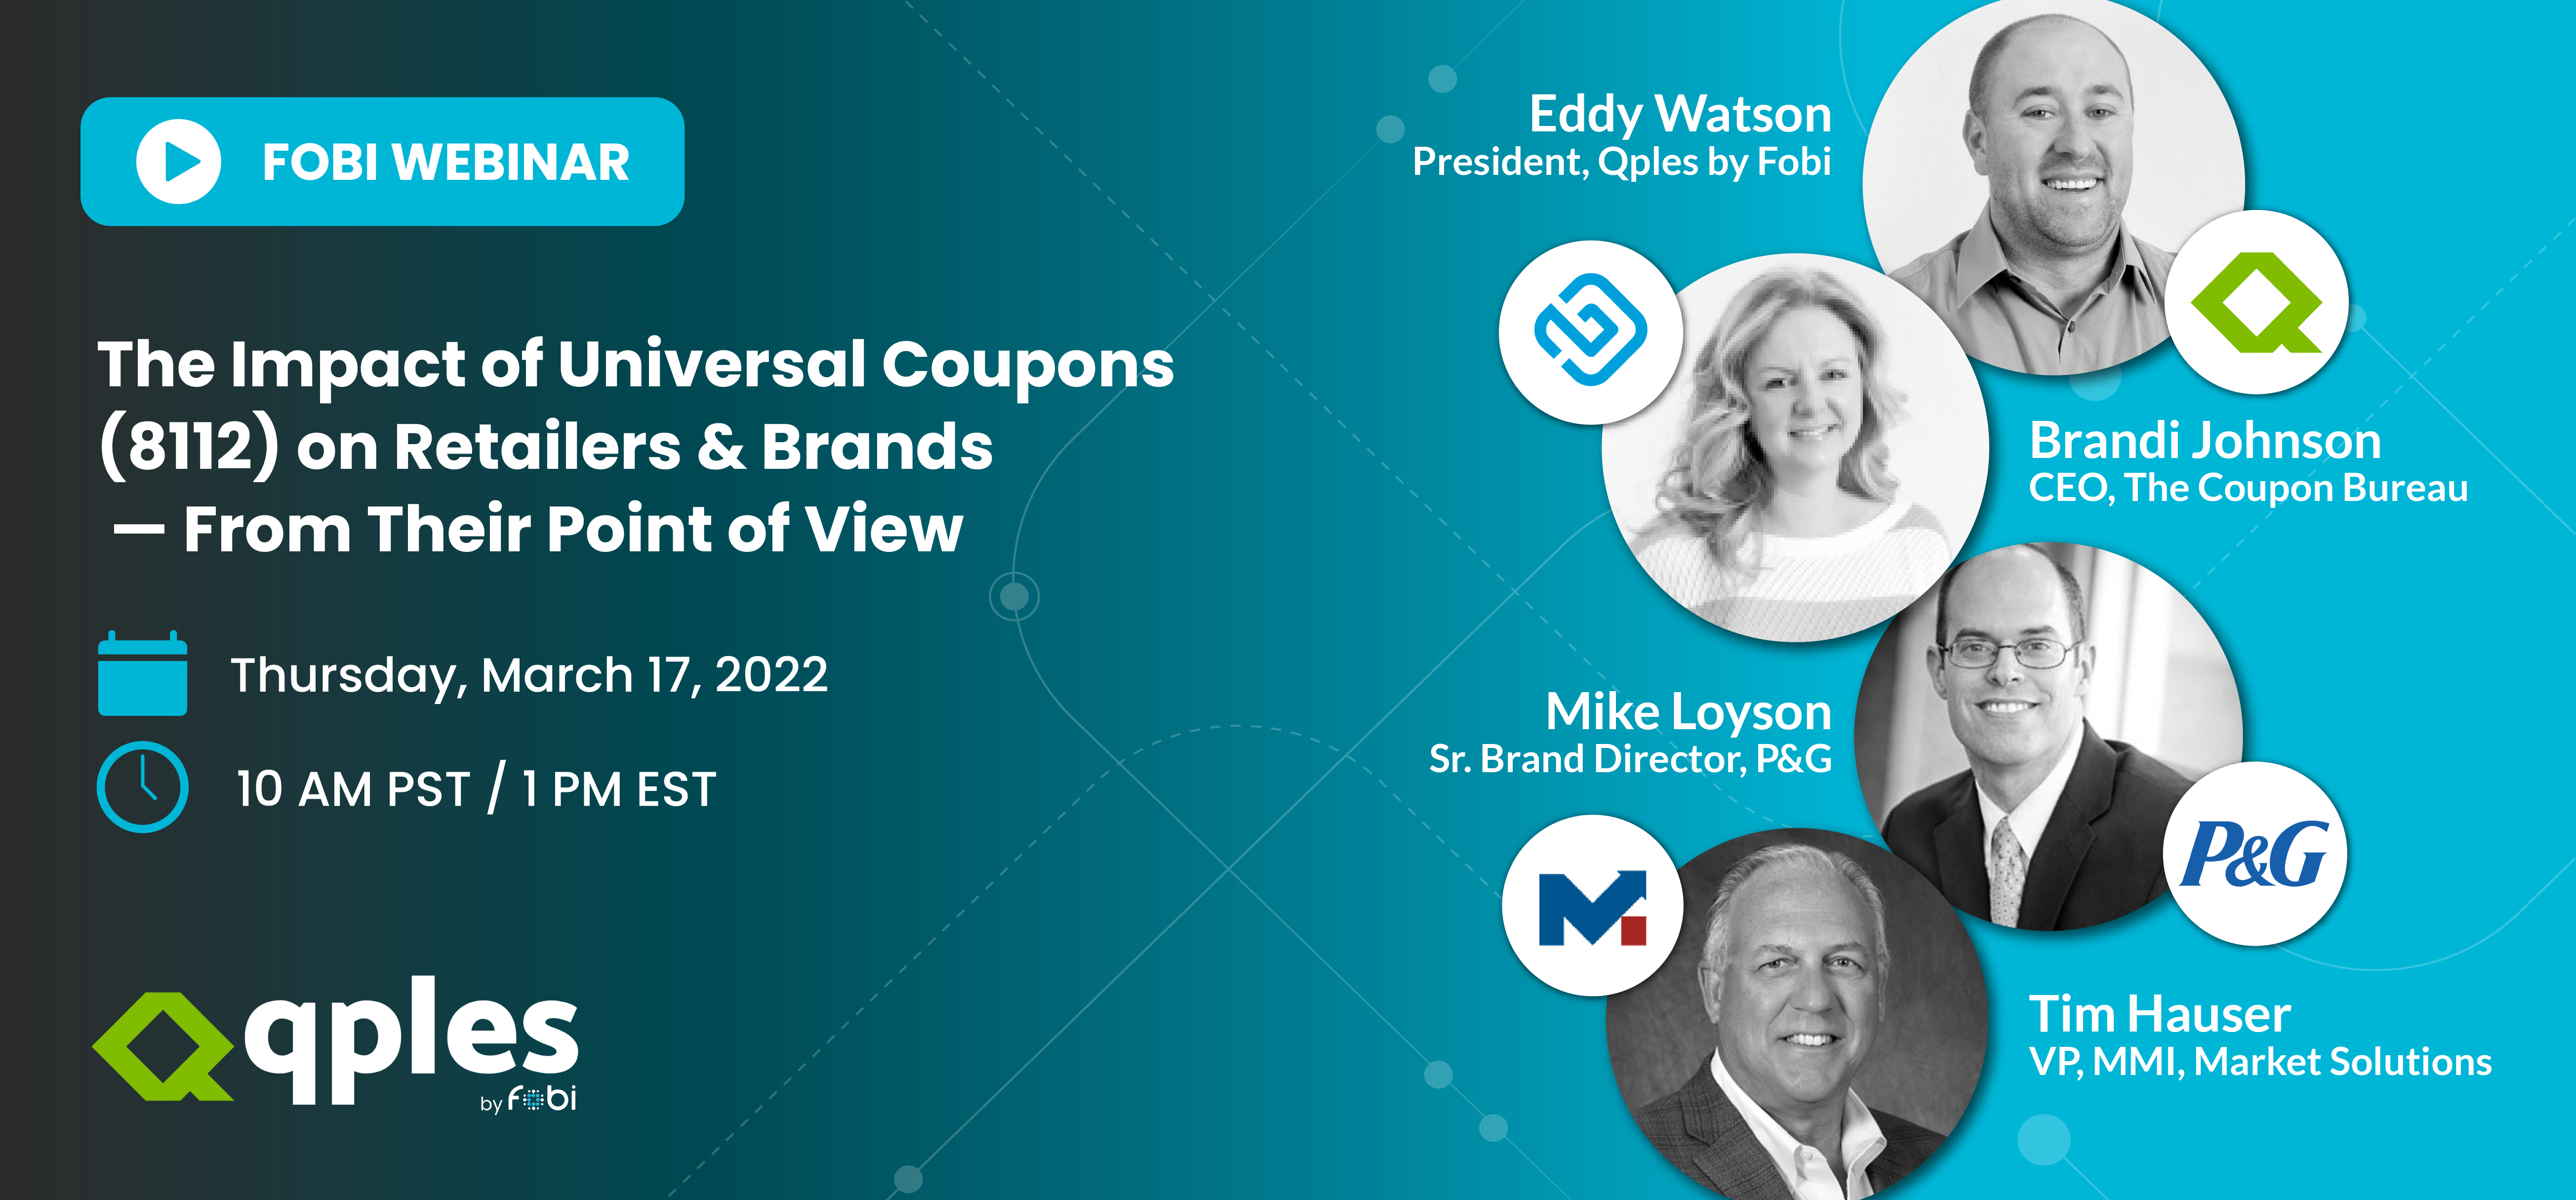 The Impact of Universal Coupons (8112) on Brands and Retailers, Online Event